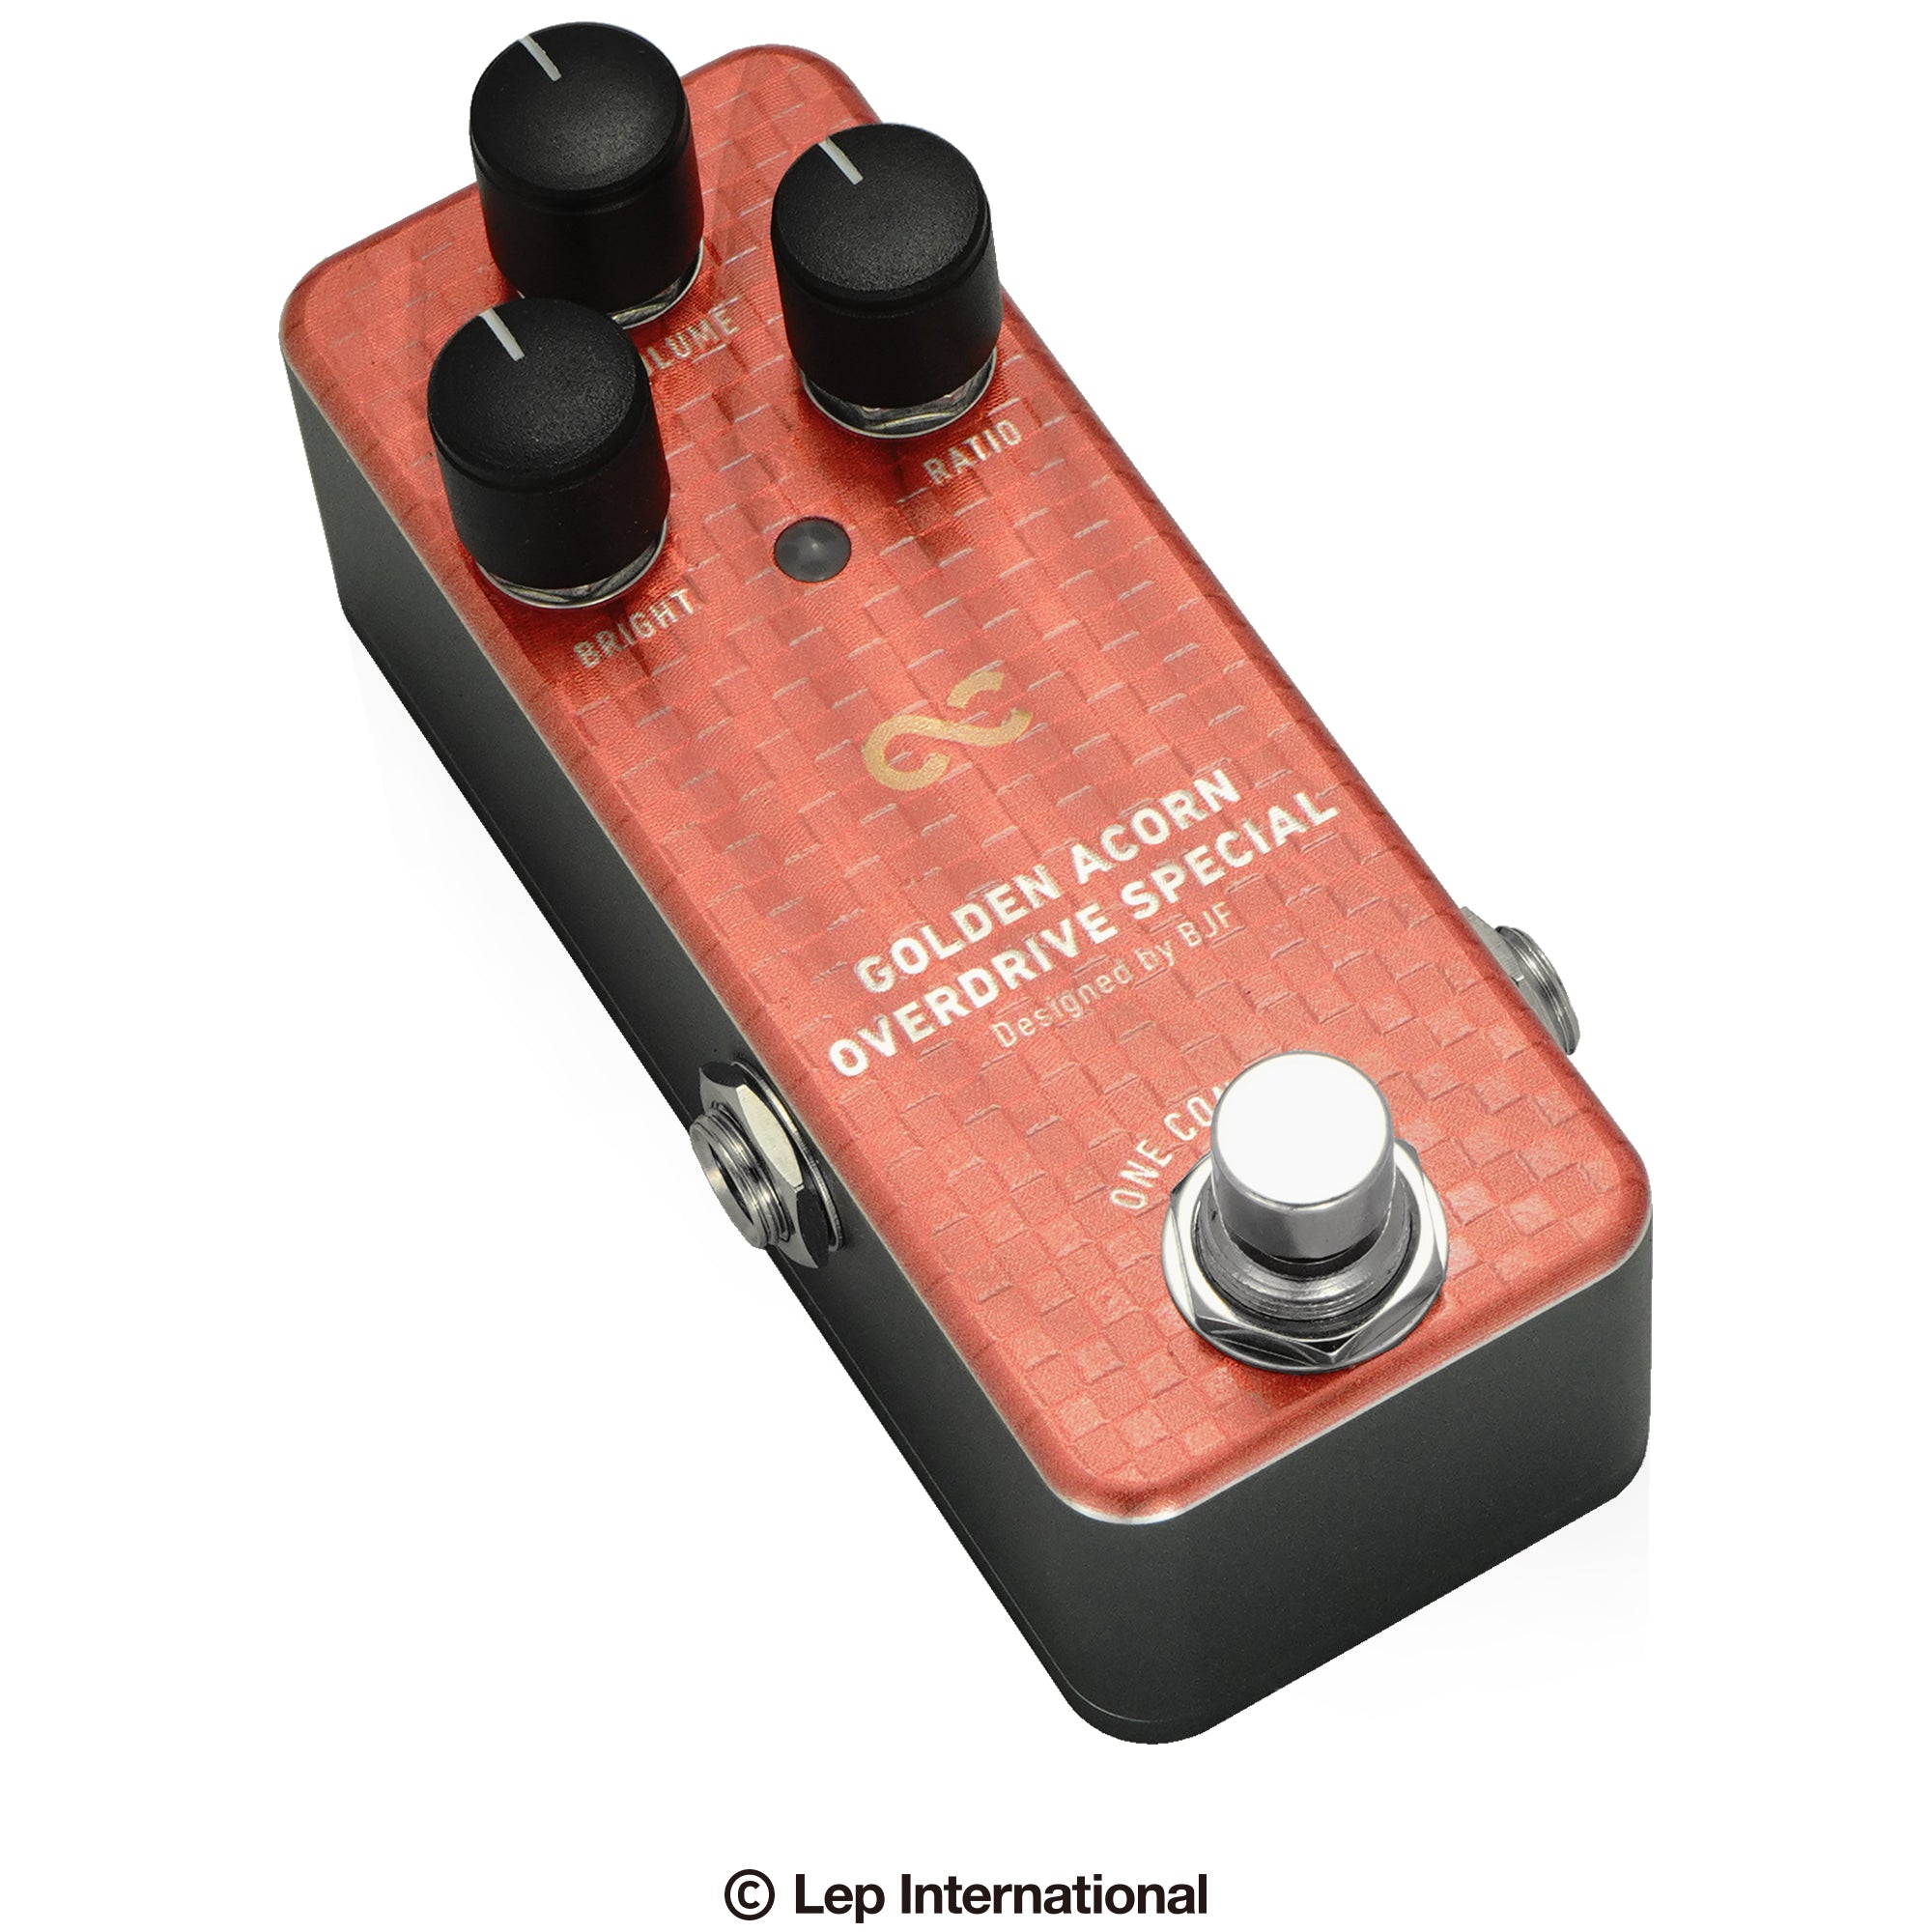 One Control GOLDEN ACORN OVERDRIVE SPECIAL – OneControl